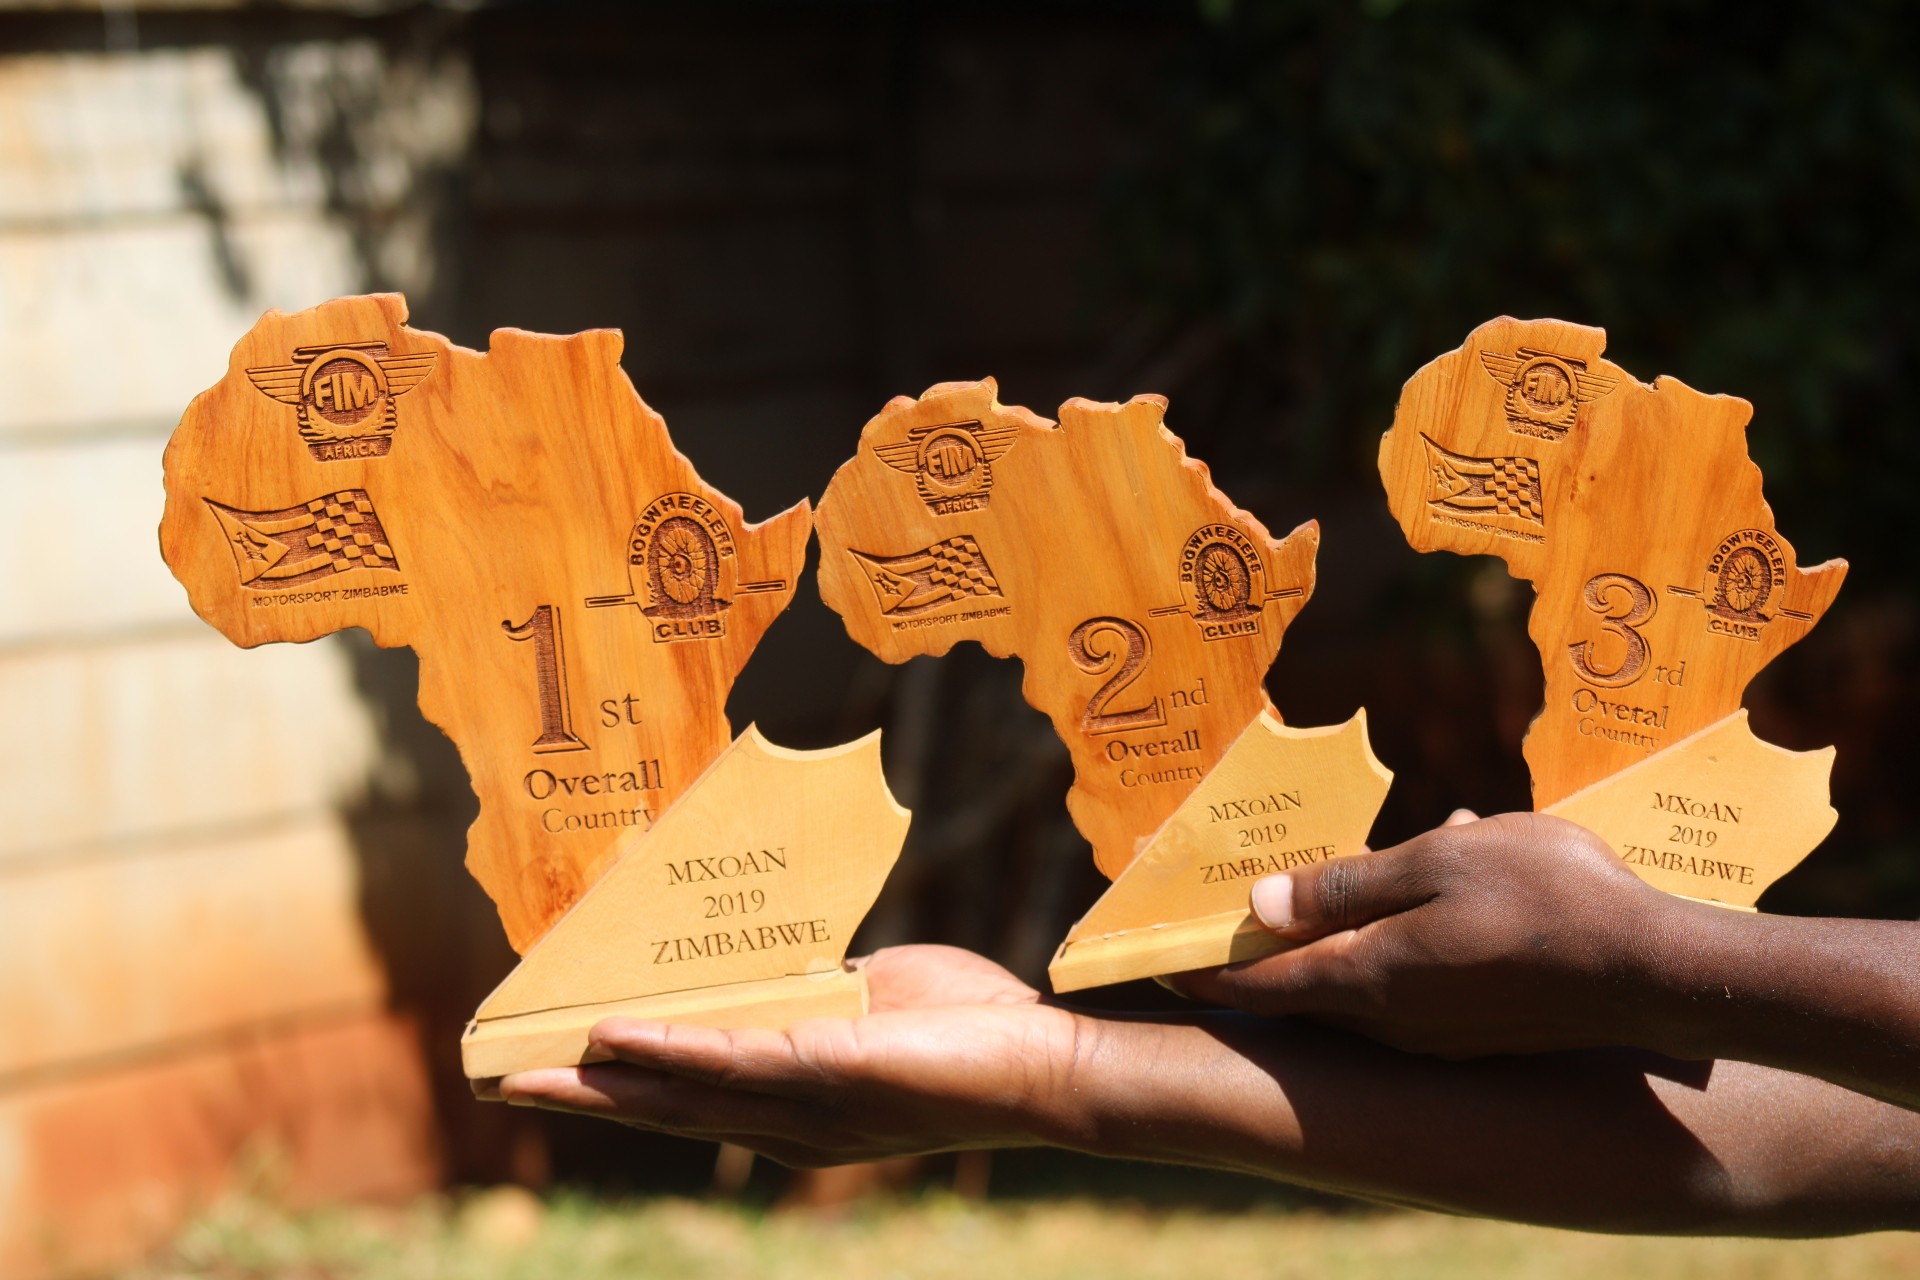 Introducing Wooden Medals, Awards and Trophies By Mirage Craftware Zimbabwe